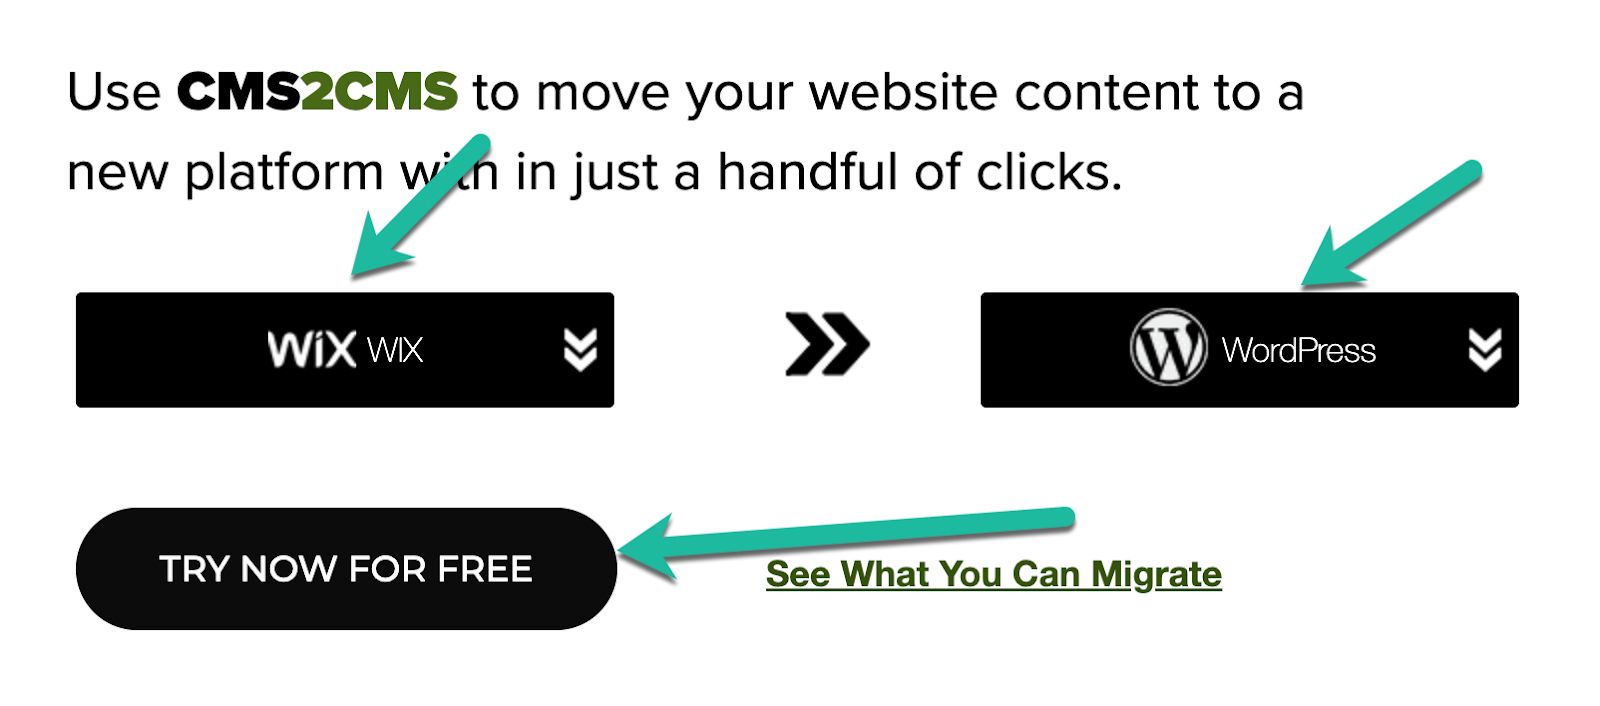 First, go to https://cms2cms.com/ and select the site you are moving from (Wix) and the site you're moving to (WordPress) and click Try Now for Free to go to the next screen.